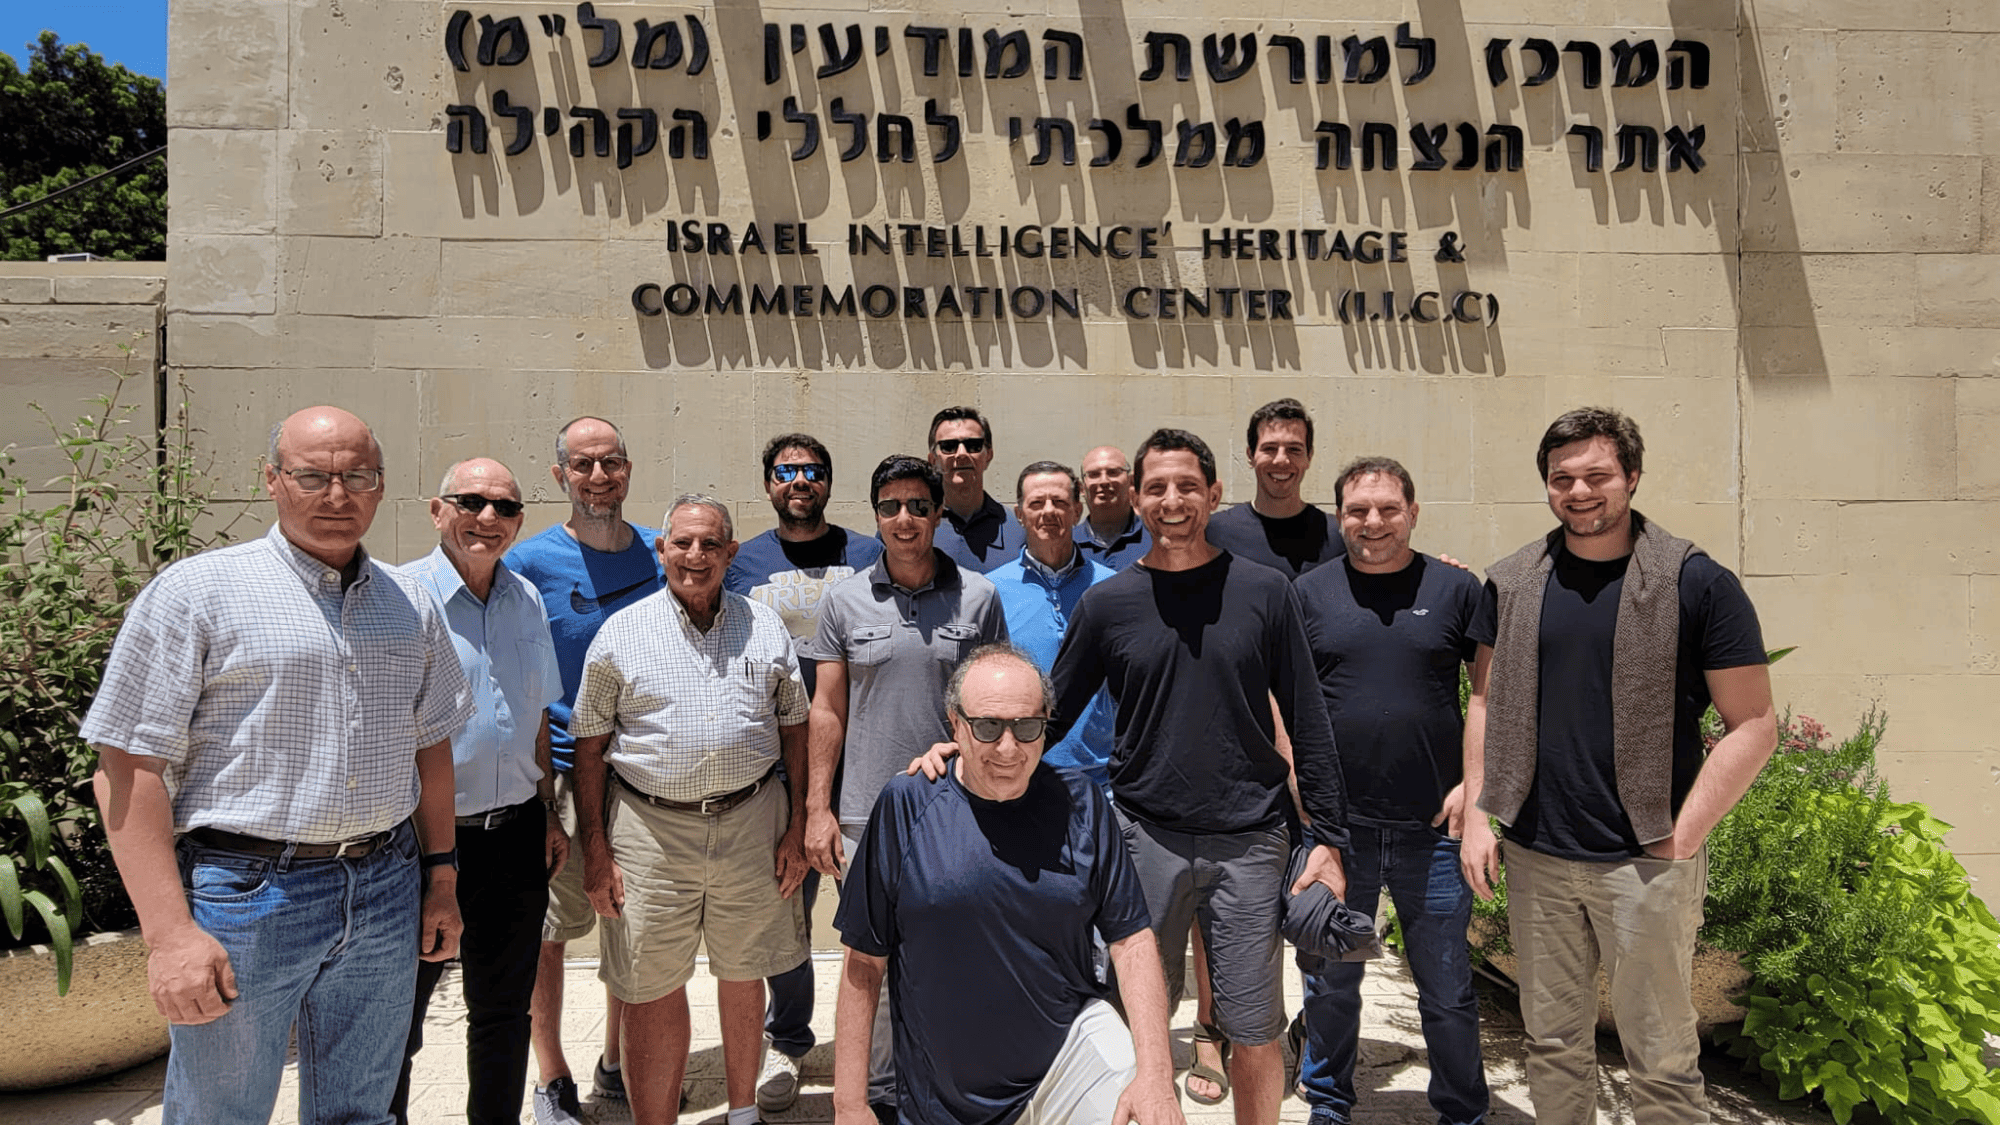 Seminar participants outside the Israel Intelligence Heritage and Commemoration Center in Ramat Hasharon, June 2023. Photo: Courtesy of AFIICC.